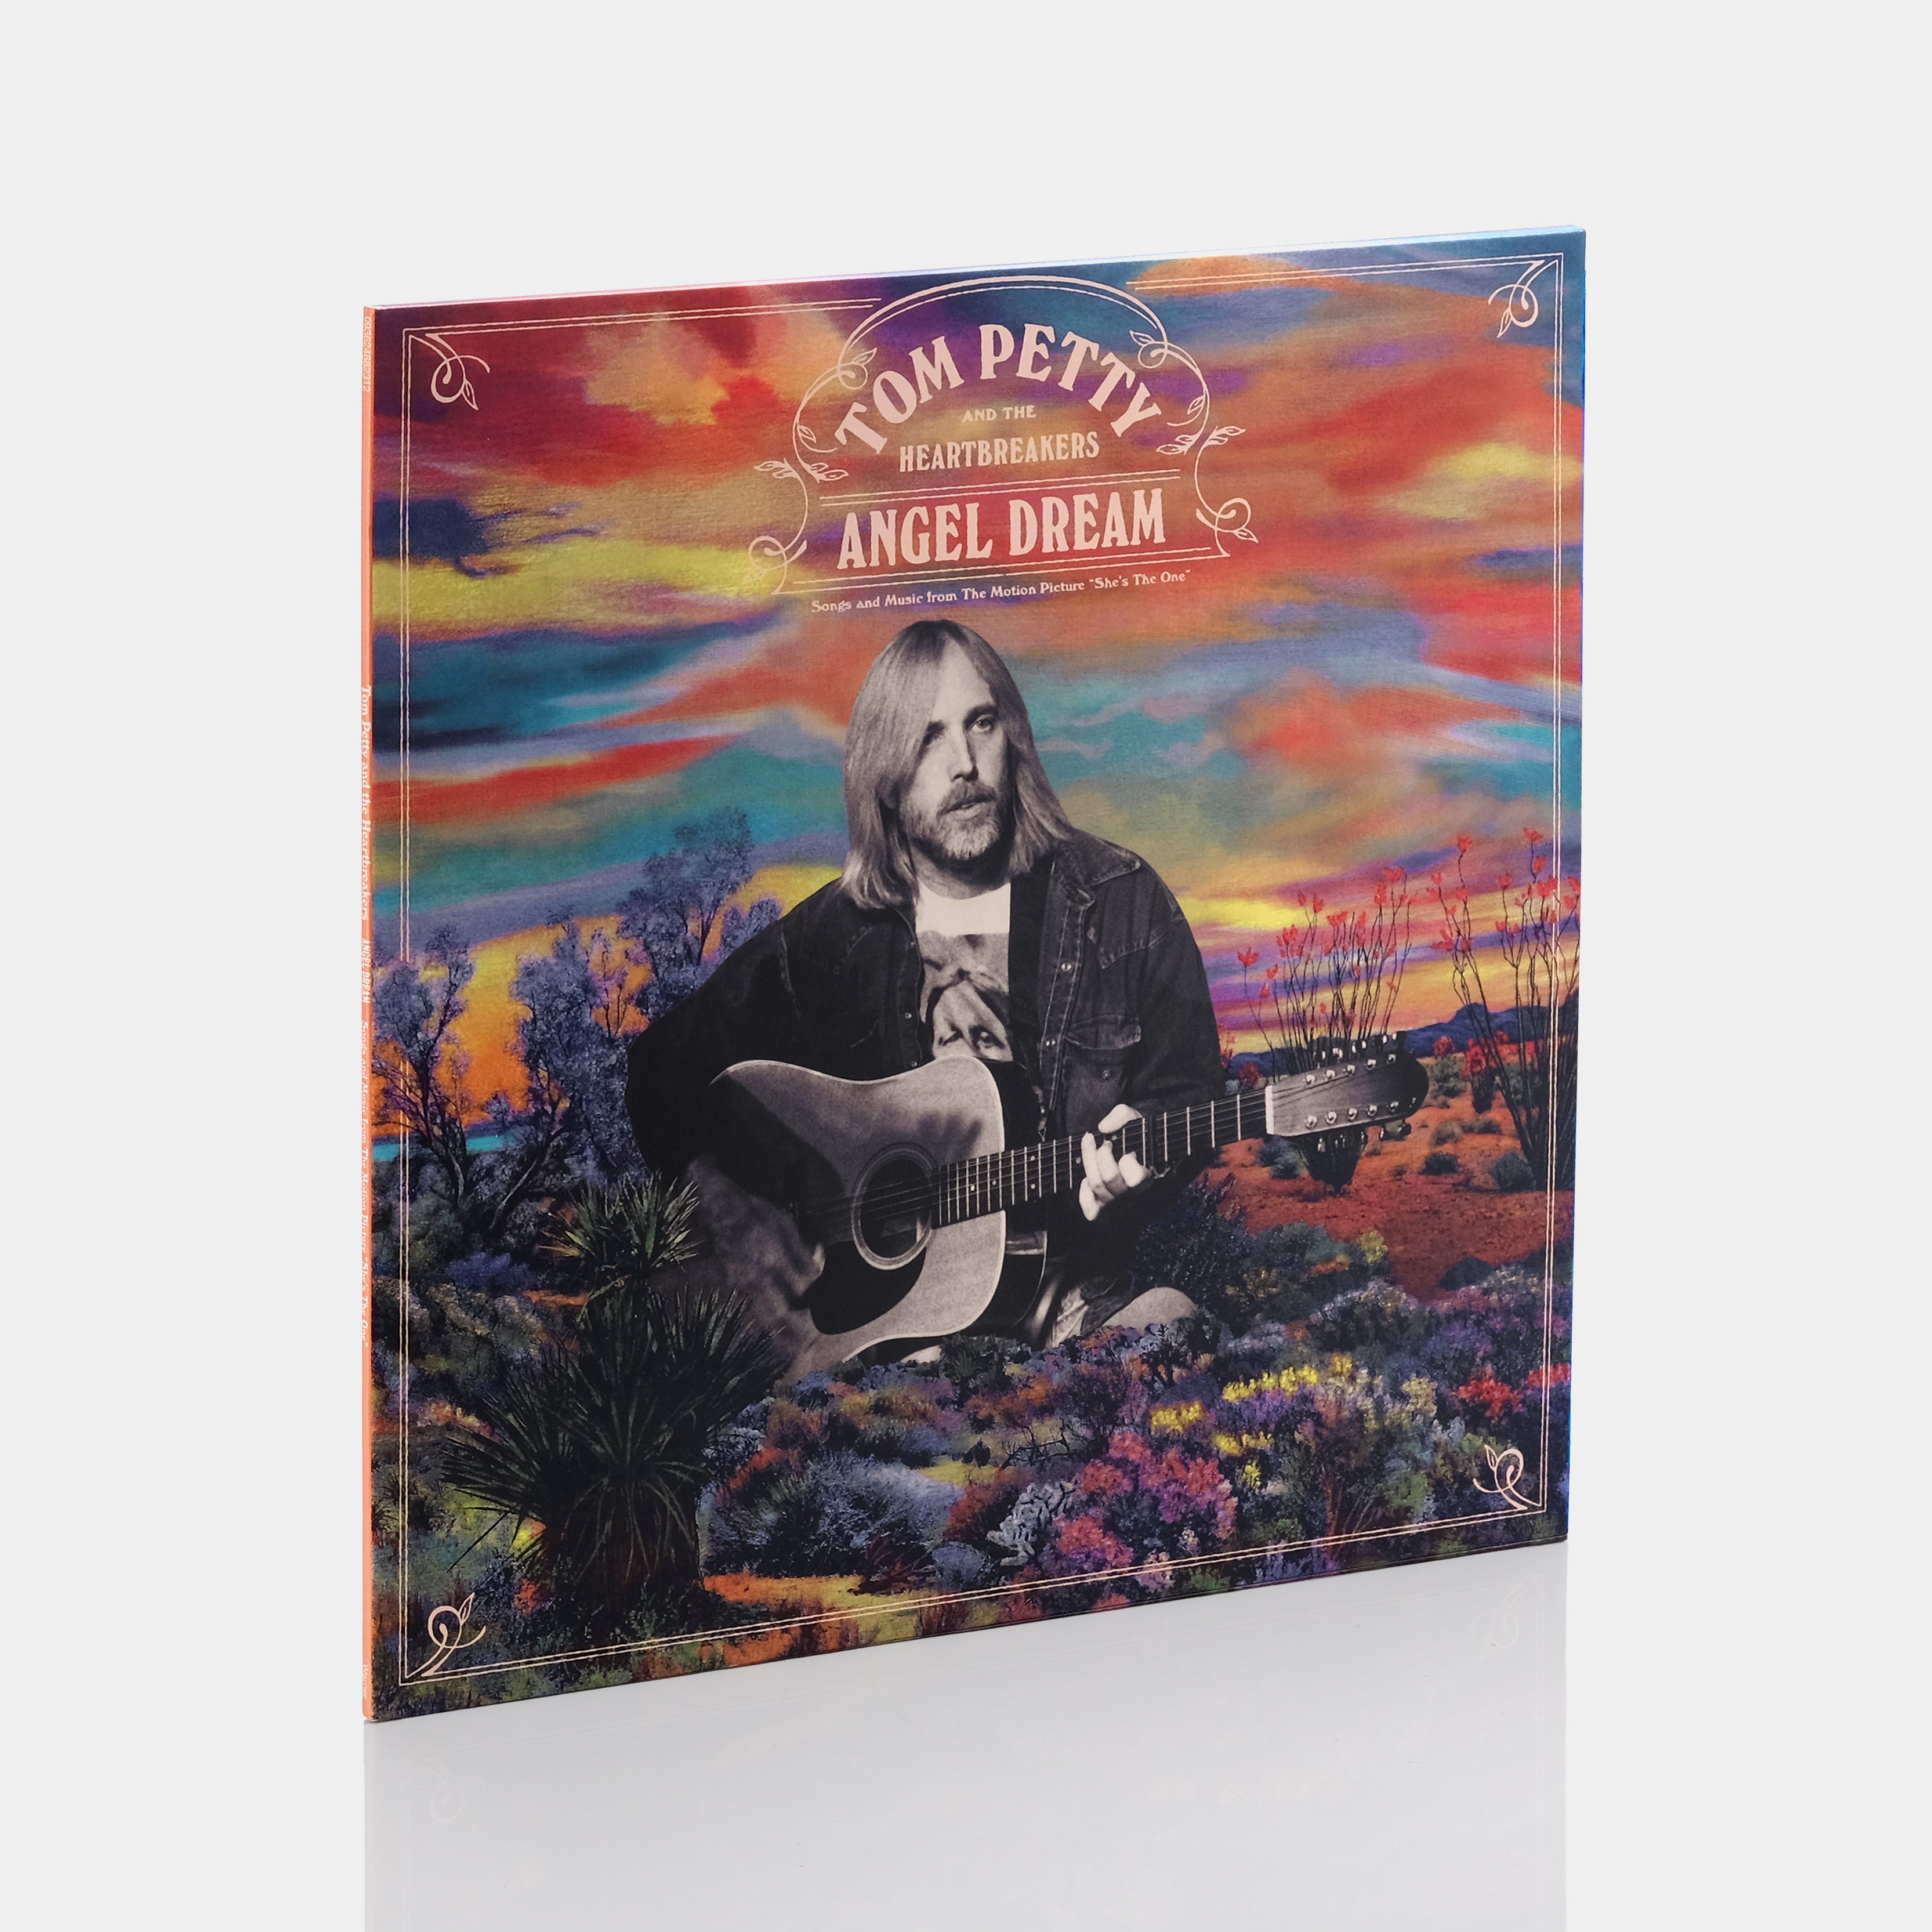 Tom Petty And The Heartbreakers - Angel Dream (Songs And Music From The Motion Picture "She's The One") 2xLP Cobalt Blue Vinyl Record